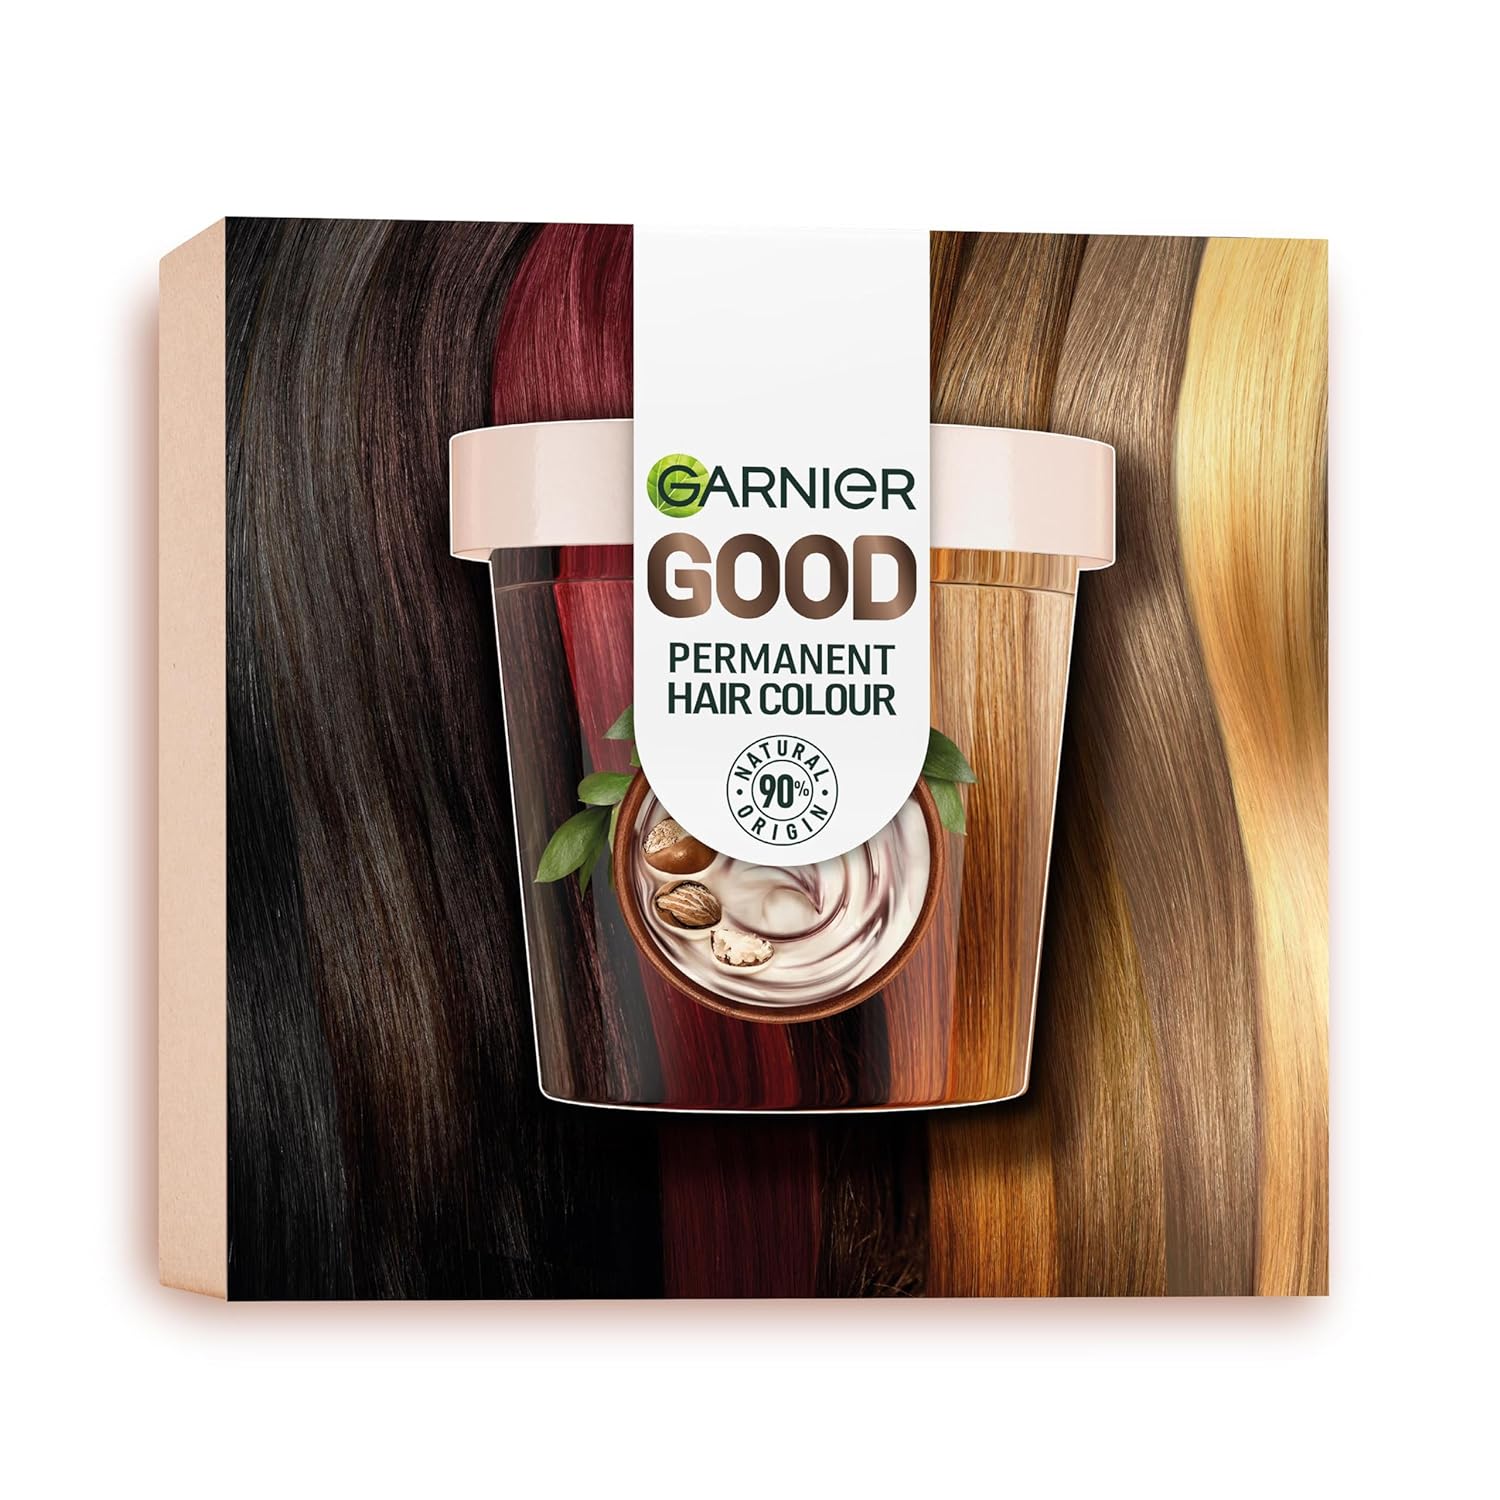 Garnier Permanent Hair Colour, Hair Dye Set for Intense and Long-Lasting Hair Colour, Colouration for up to 8 Weeks of Radiant Colour, No Ammonia, 9.1 Vanilla Blonde, Good Refill Kit